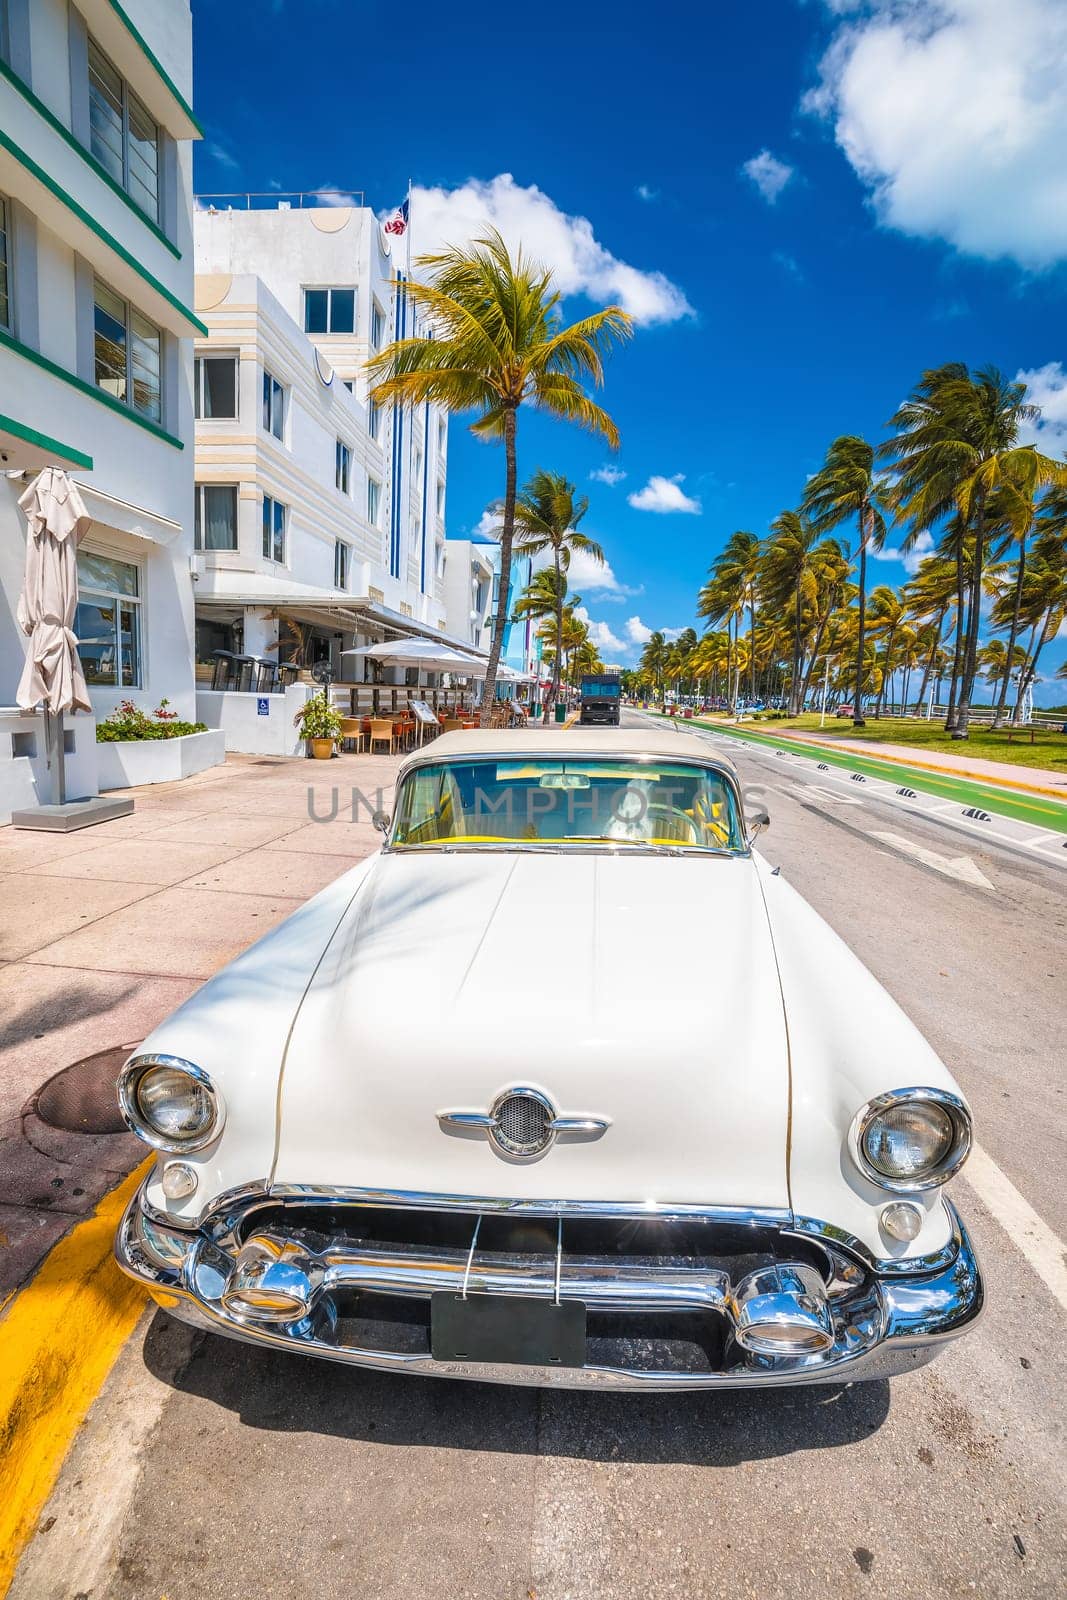 Miami South Beach Ocean Drive colorful Art Deco street architecture view by xbrchx